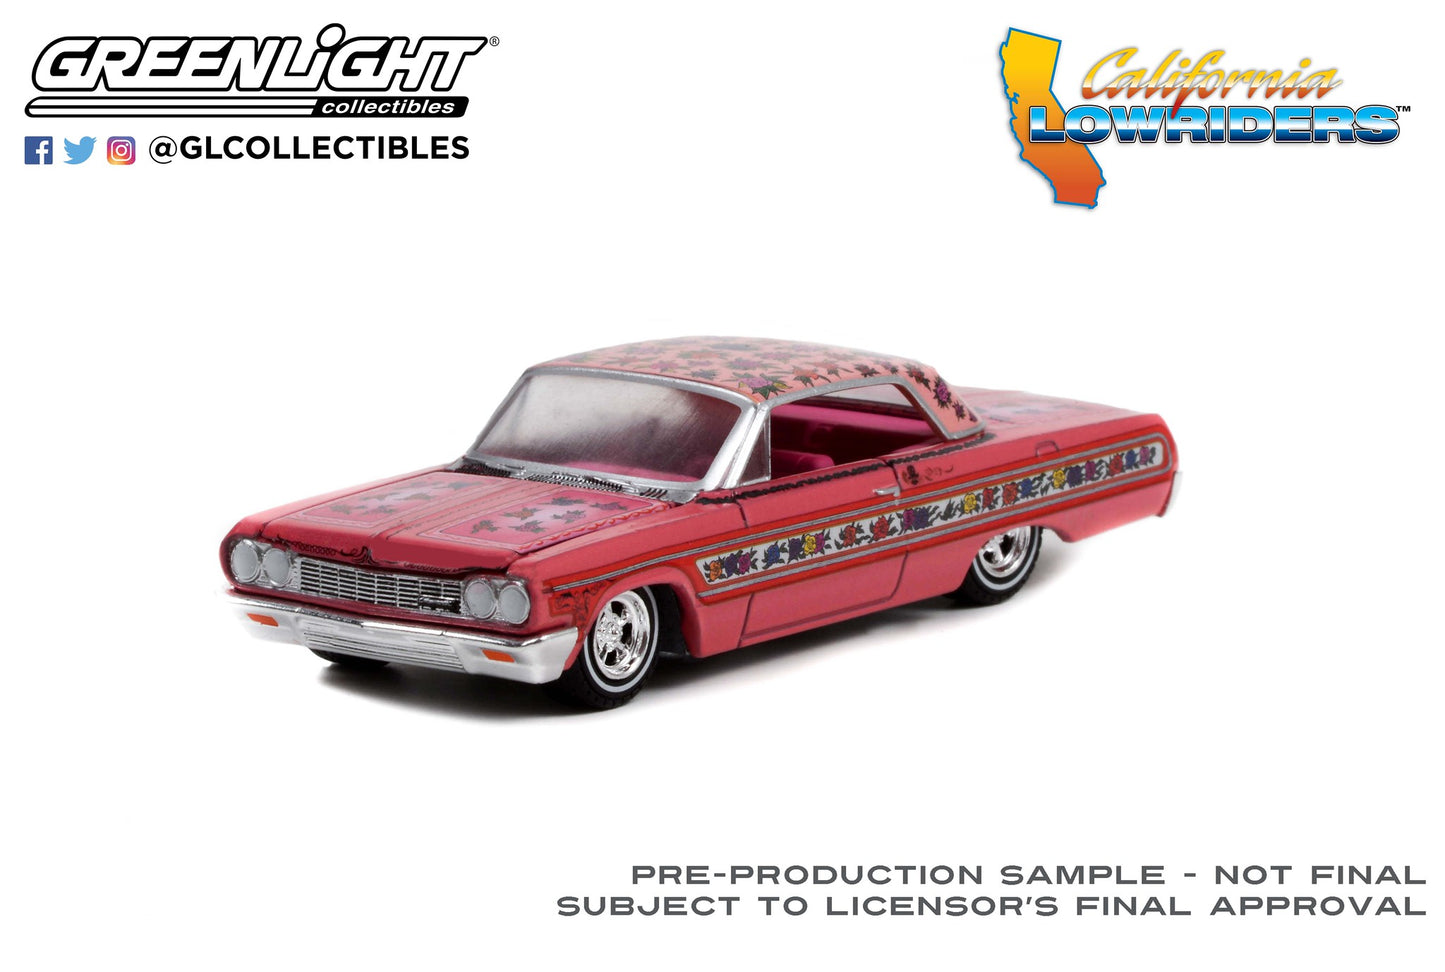 GreenLight 1:64 California Lowriders Series 1 - 1964 Chevrolet Impala Lowrider - Pink with Roses 63010-A